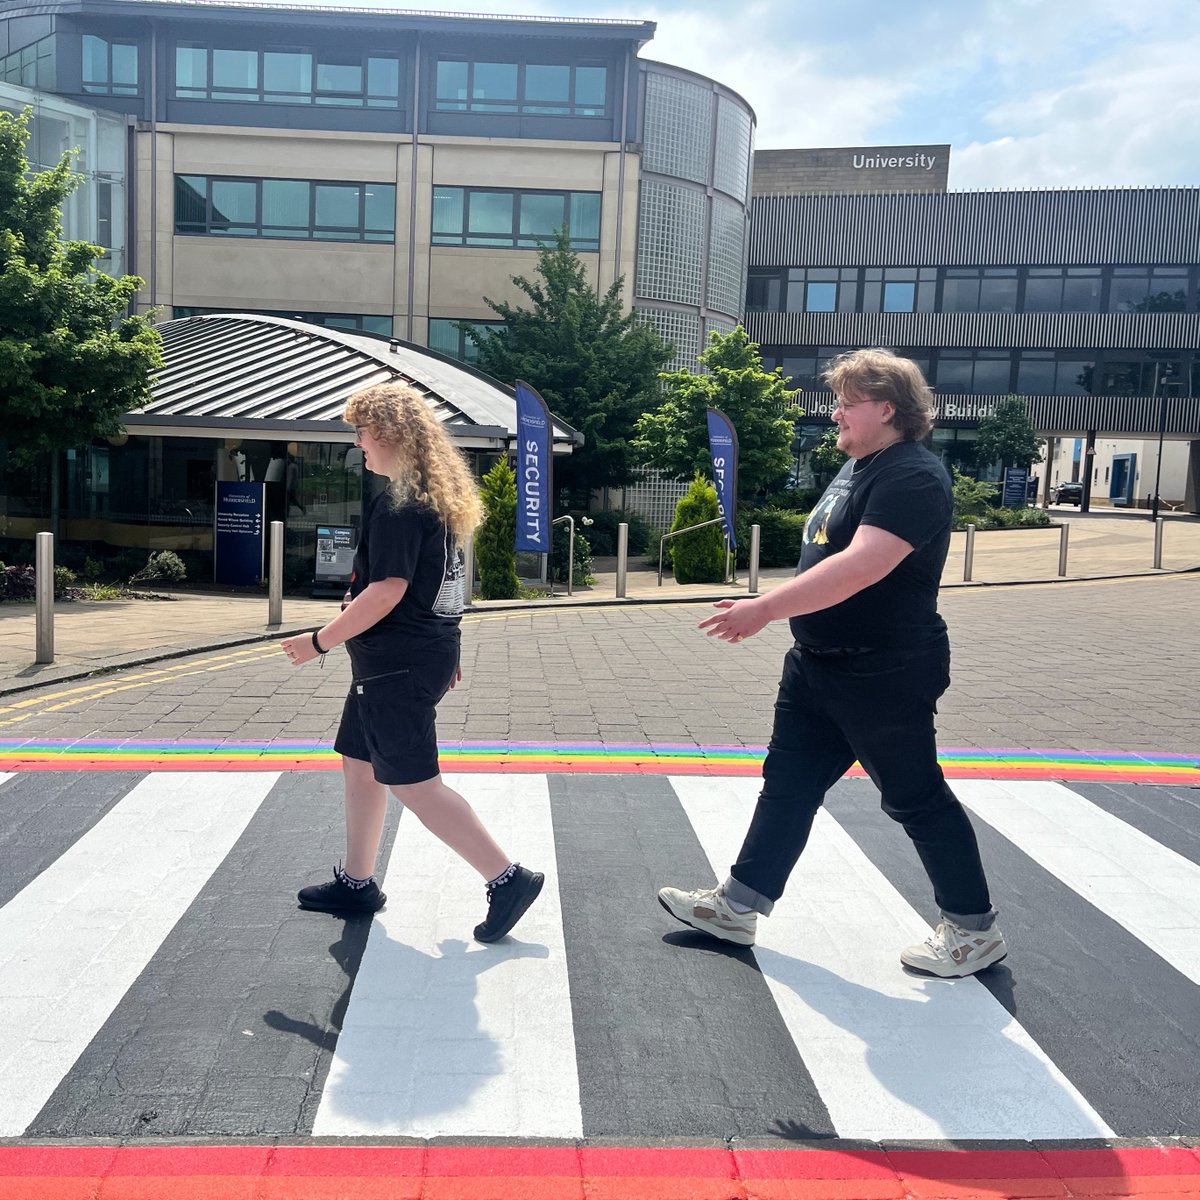 Thanks to student feedback, @HuddersfieldUni has a new and improved pride progress crossing 🏳️‍🌈 Thanks to Millie, Katie, the LGBTQ network, and the Estates team for making this happen, improving accessibility, and valuing student voices. #HudUni #HudSU